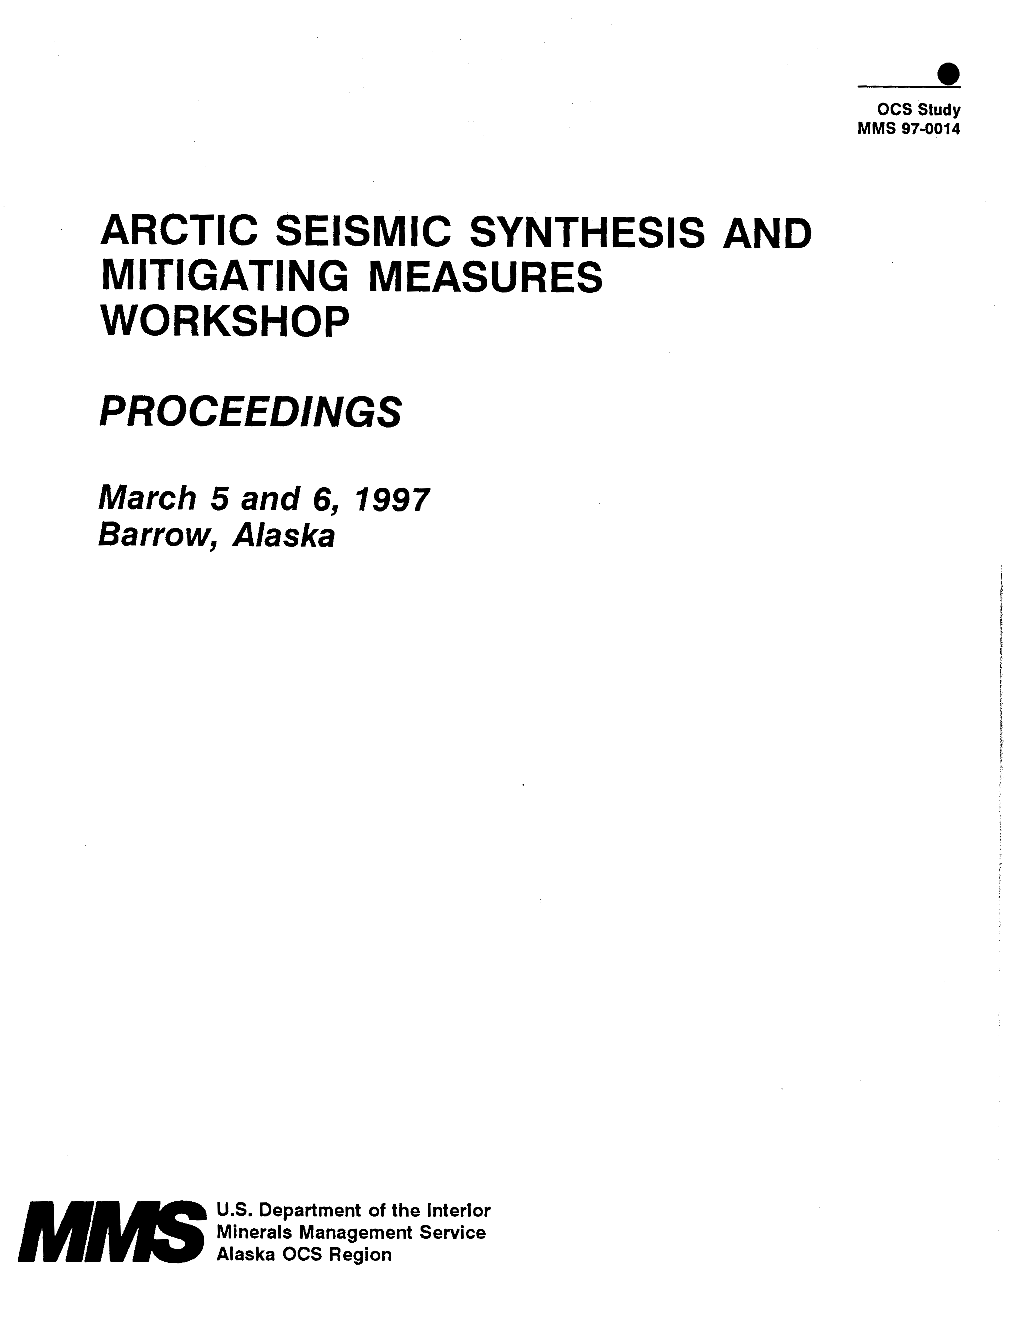 Arctic Seismic Synthesis and Mitigating Measures Workshop